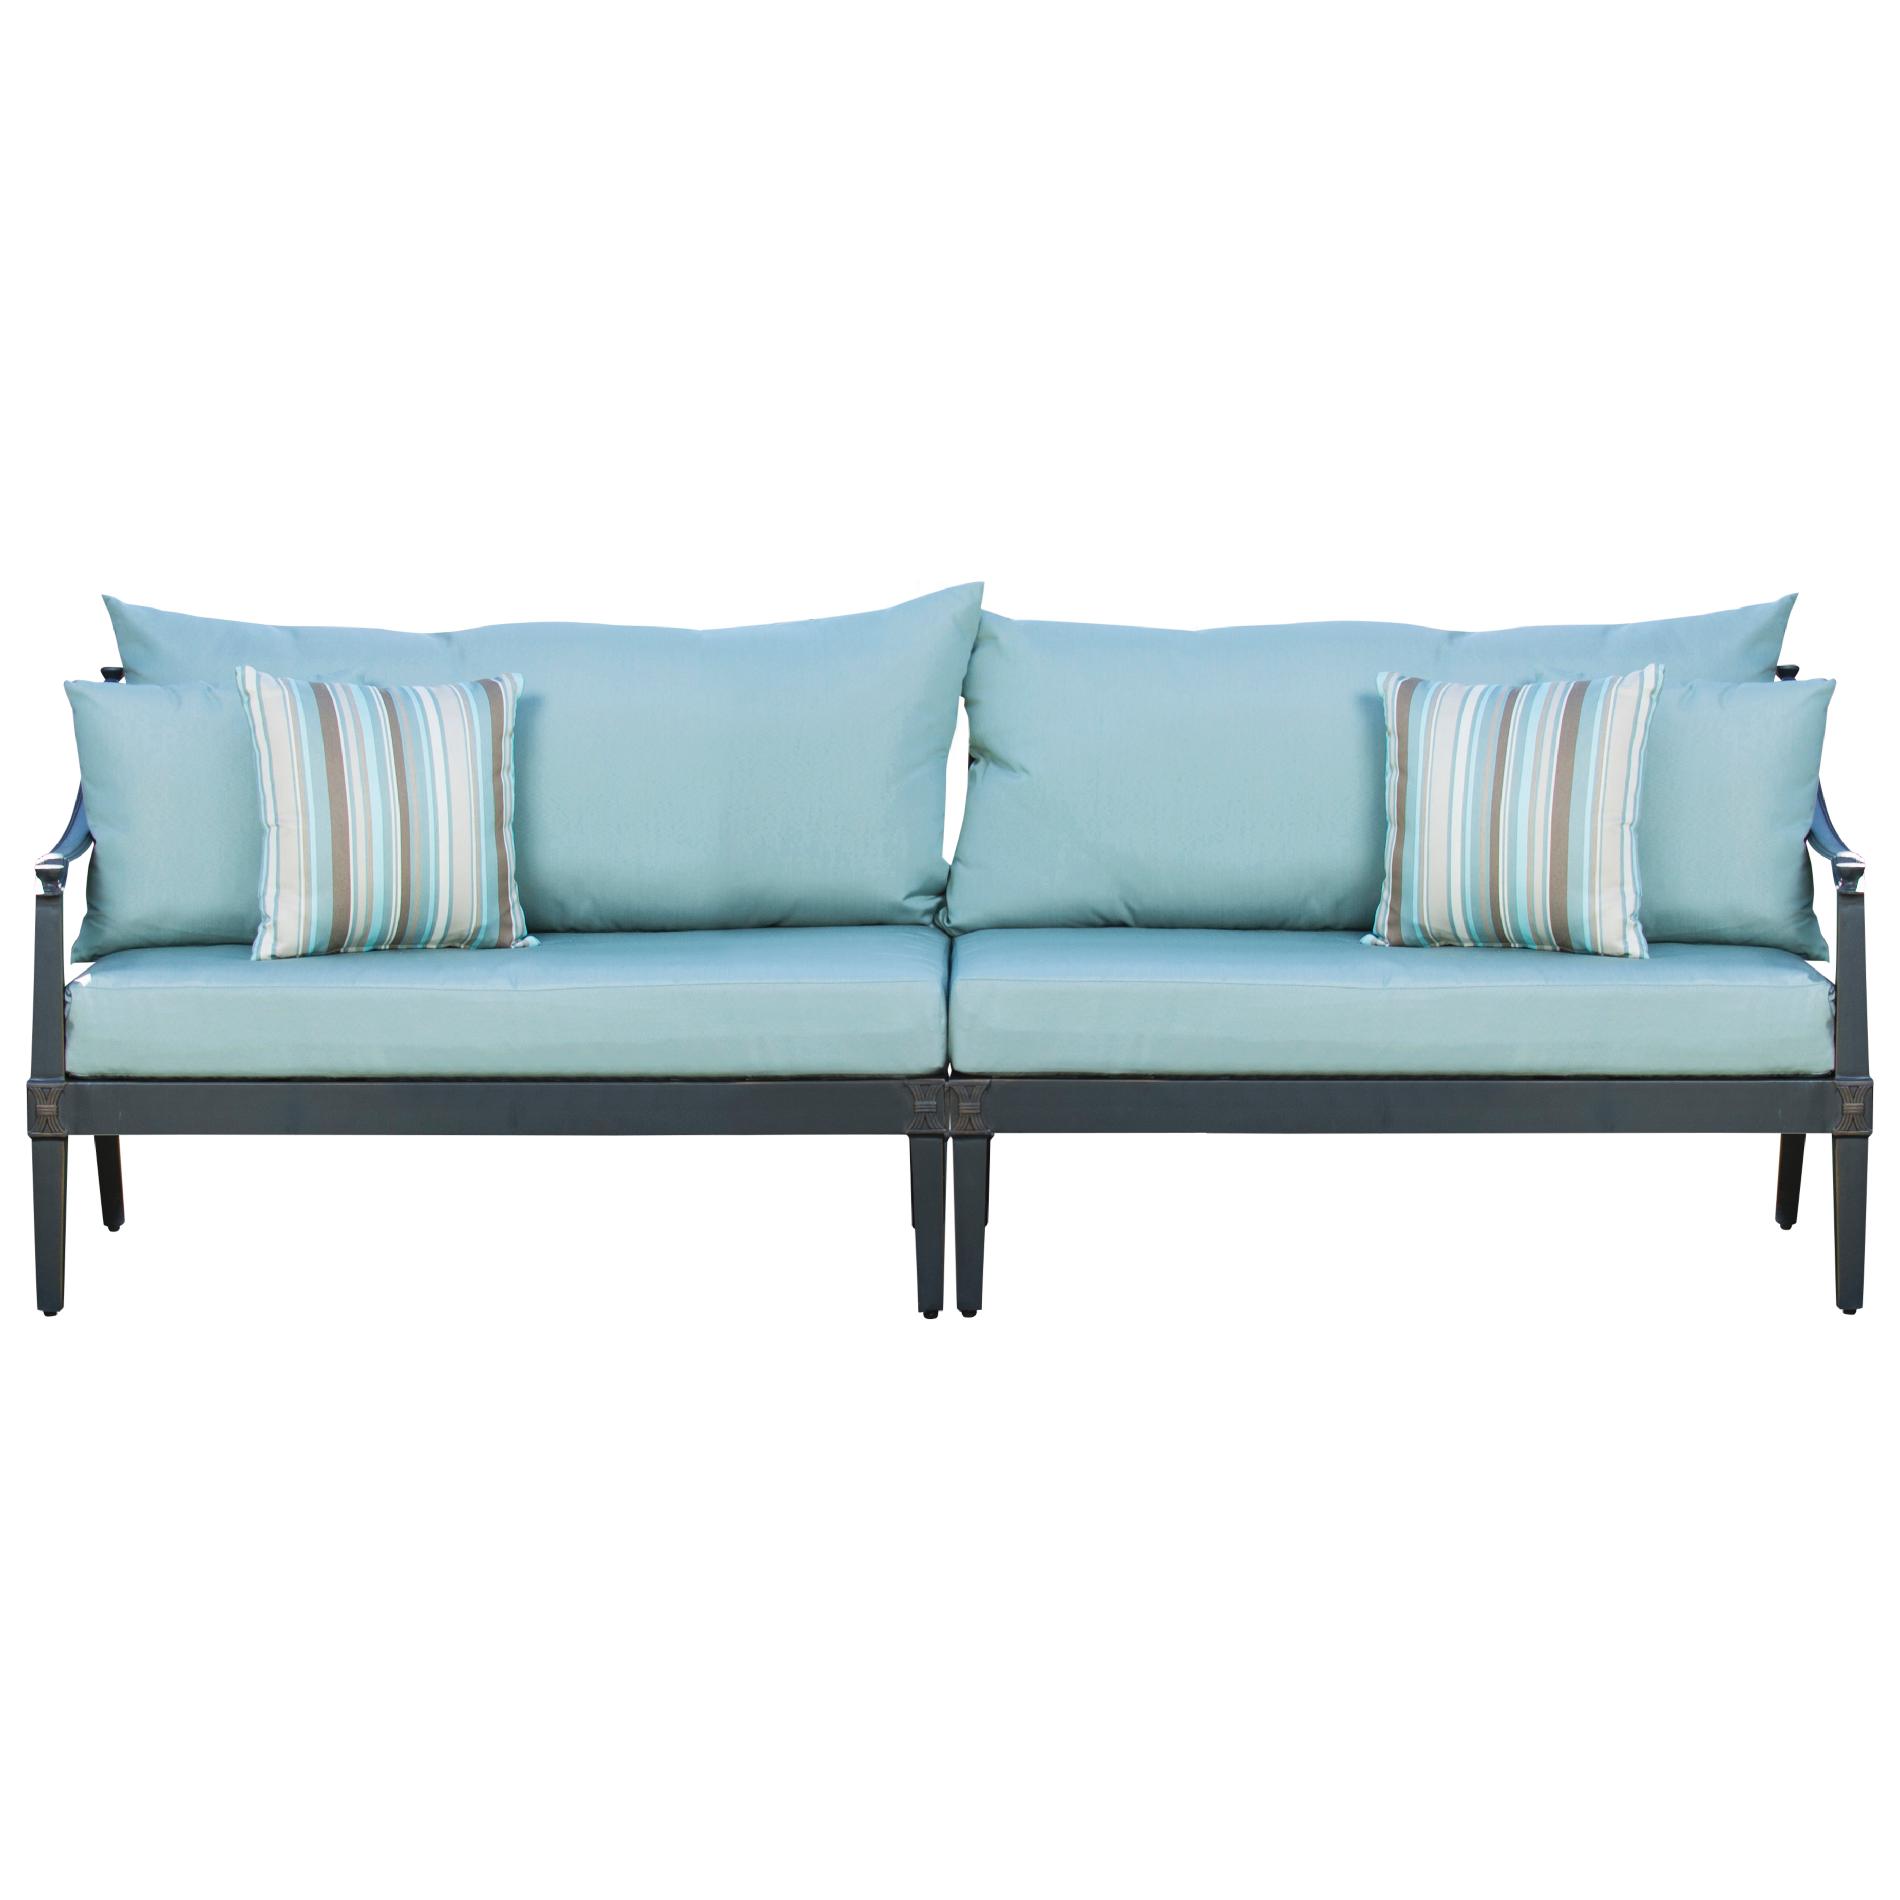 RST Brands Astoria Sofa in assorted colors